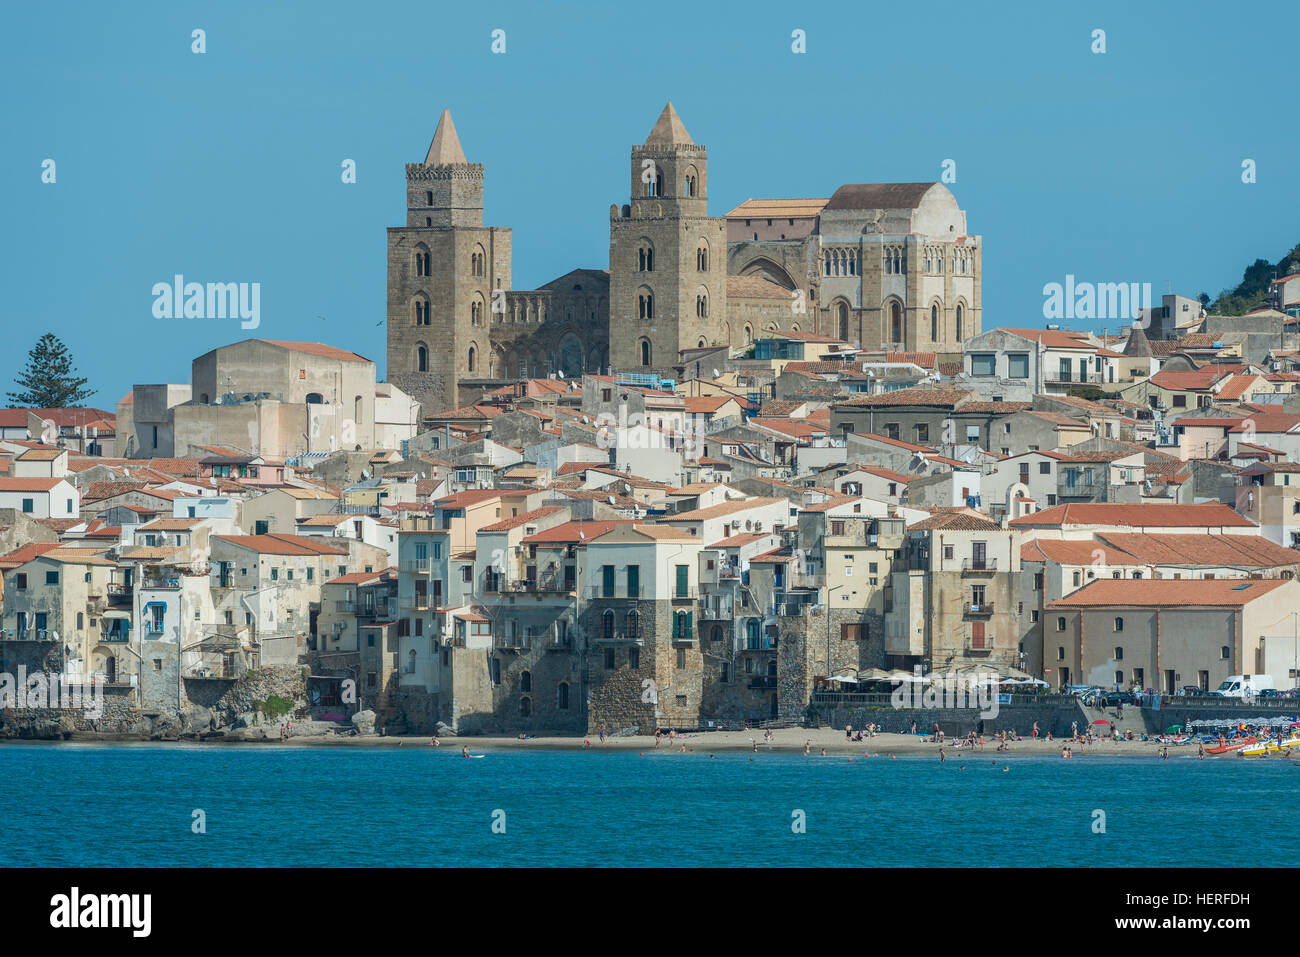 Cathedral, historic center, Cefalu, Sicily, Italy Stock Photo